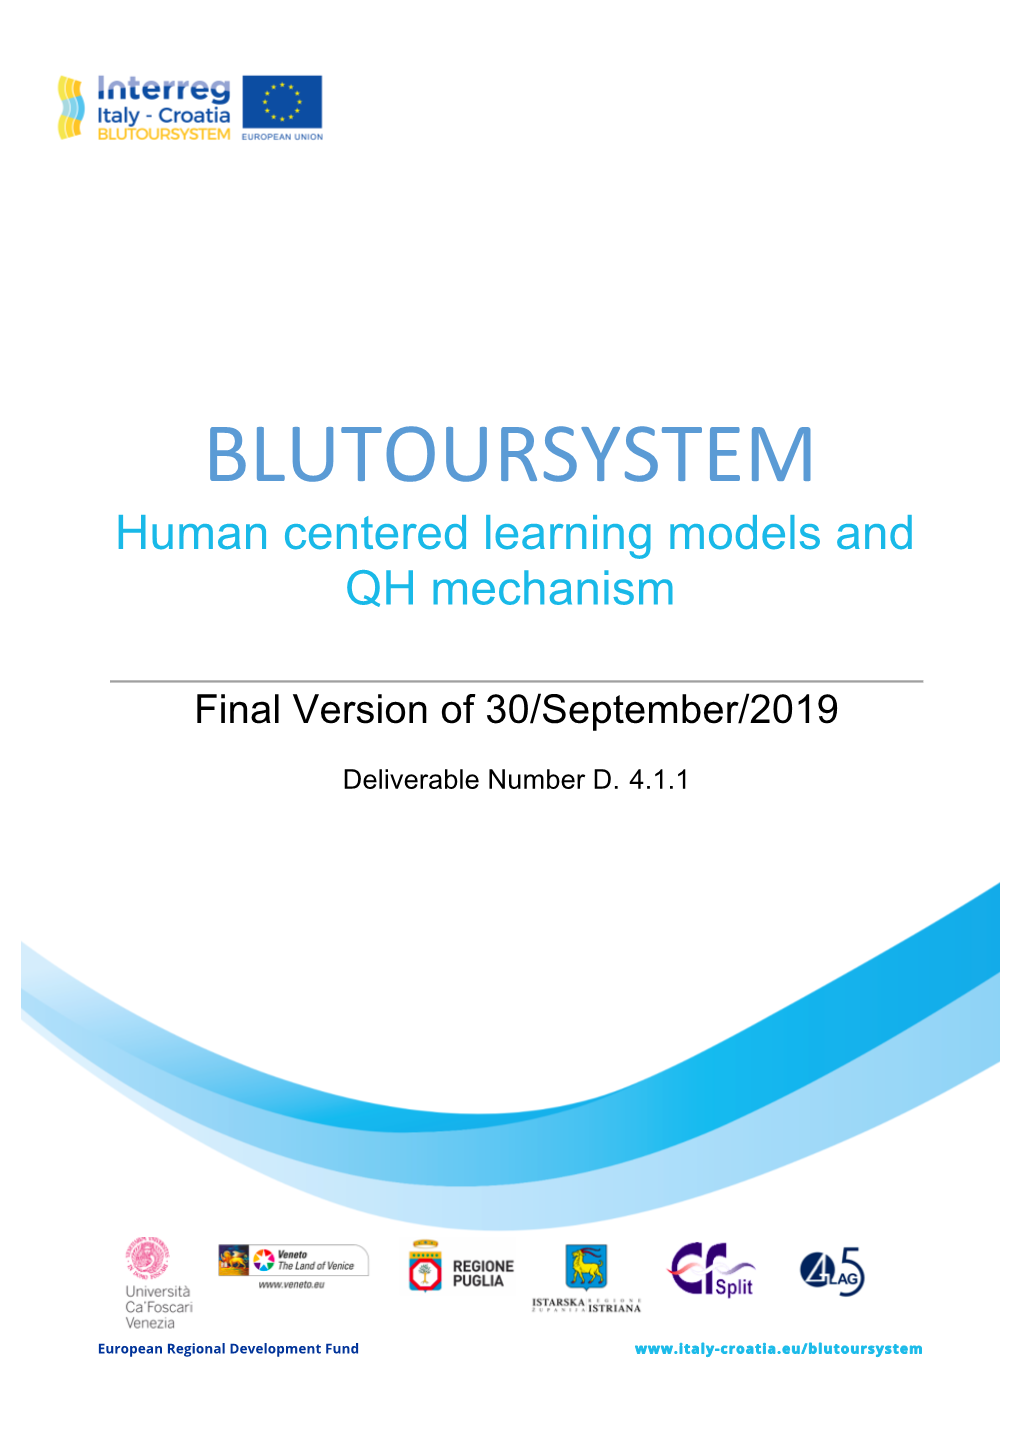 BLUTOURSYSTEM Human Centered Learning Models And